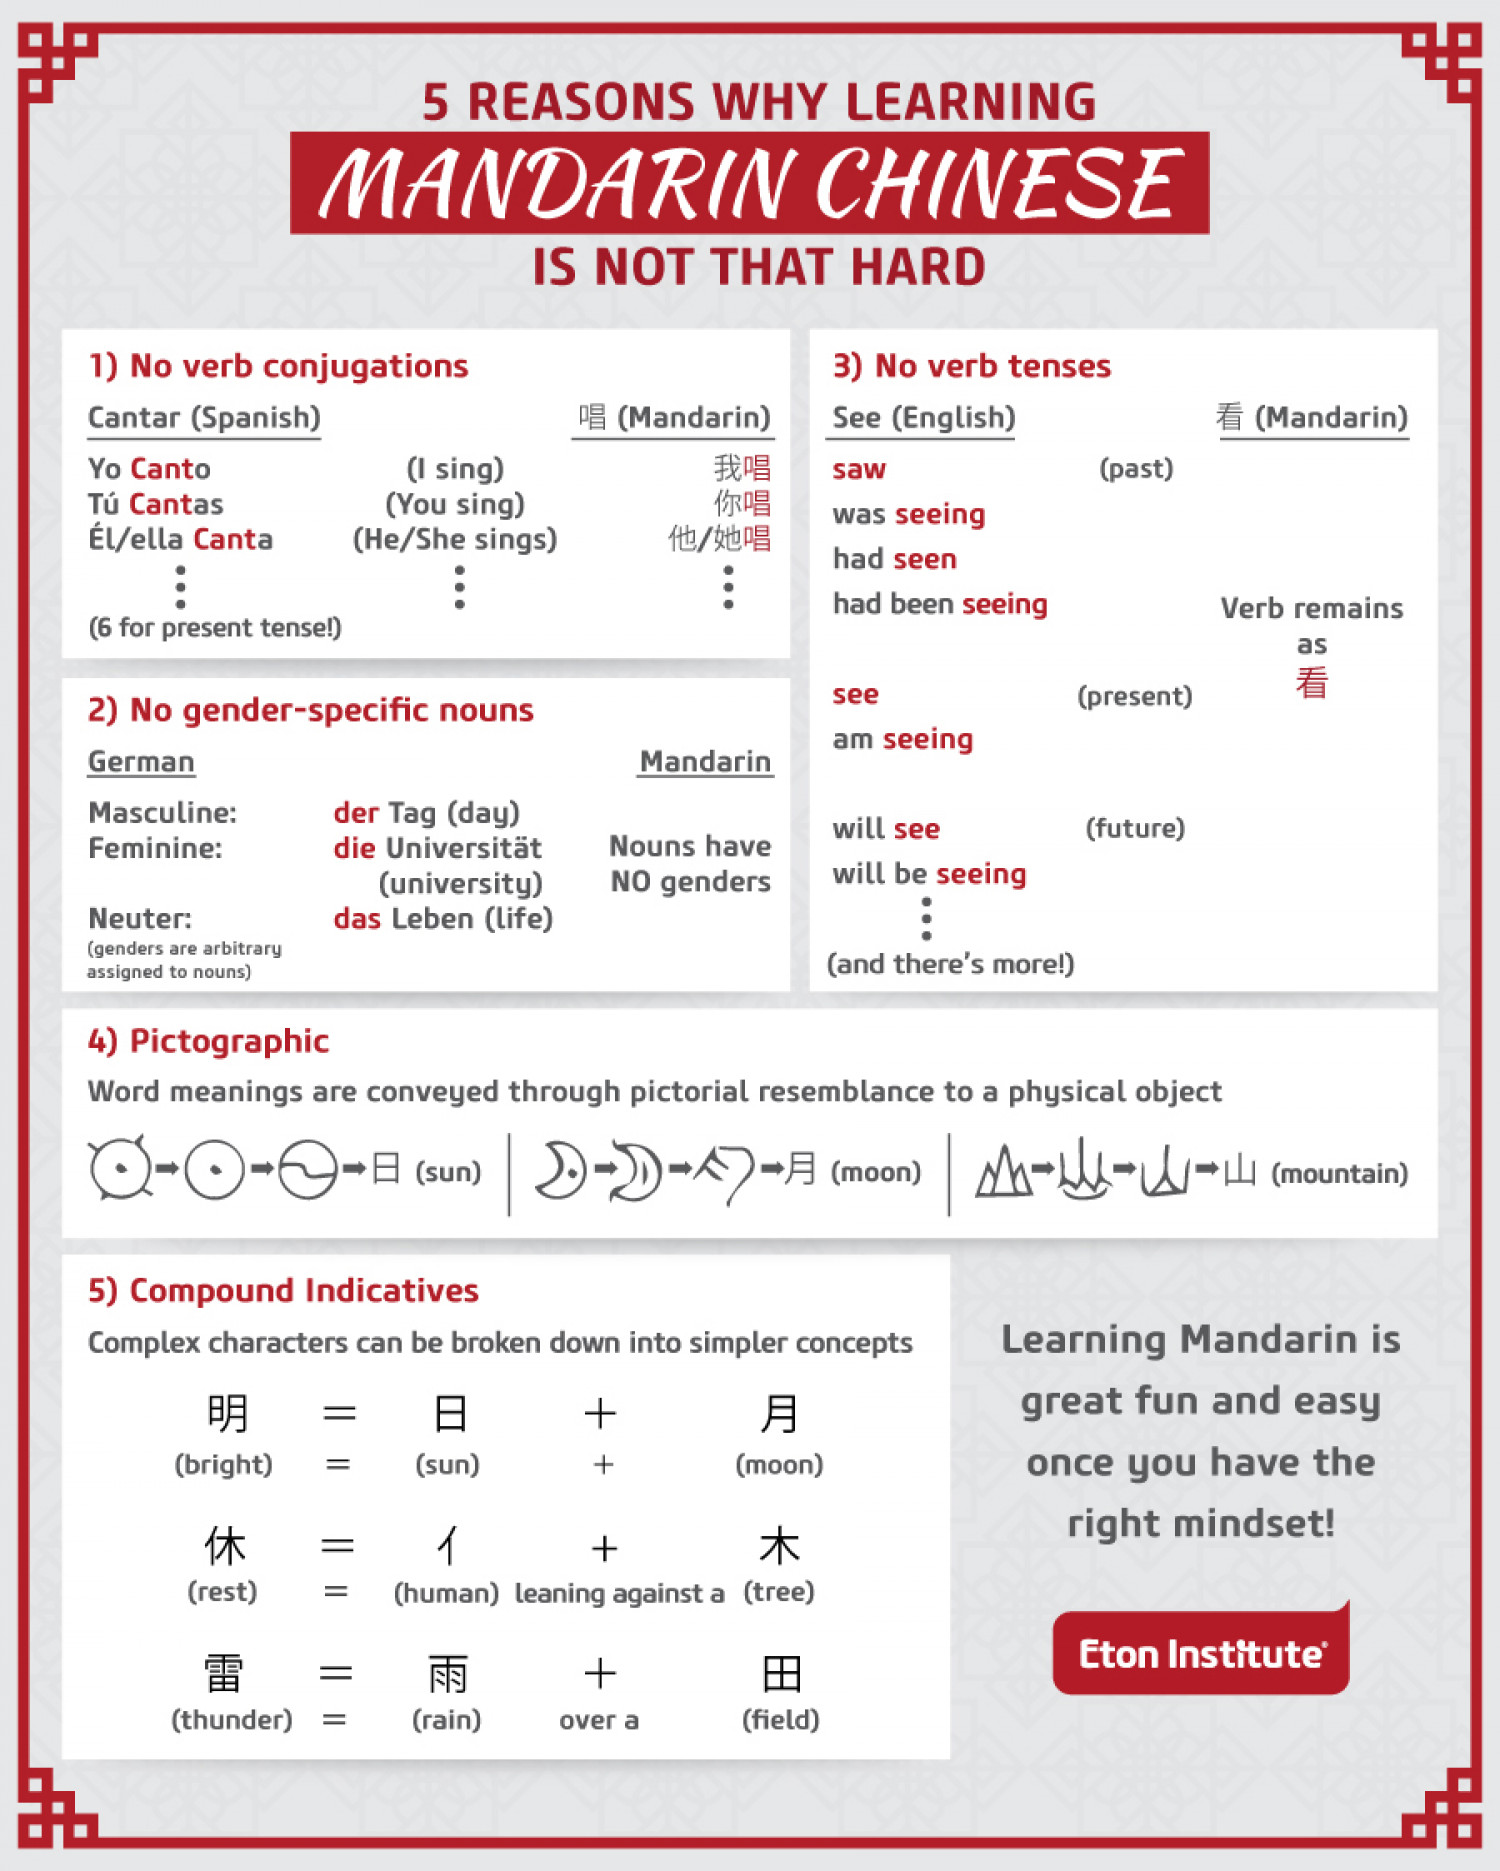 5 Reasons Why Learning Mandarin Chinese is Not That Hard Infographic